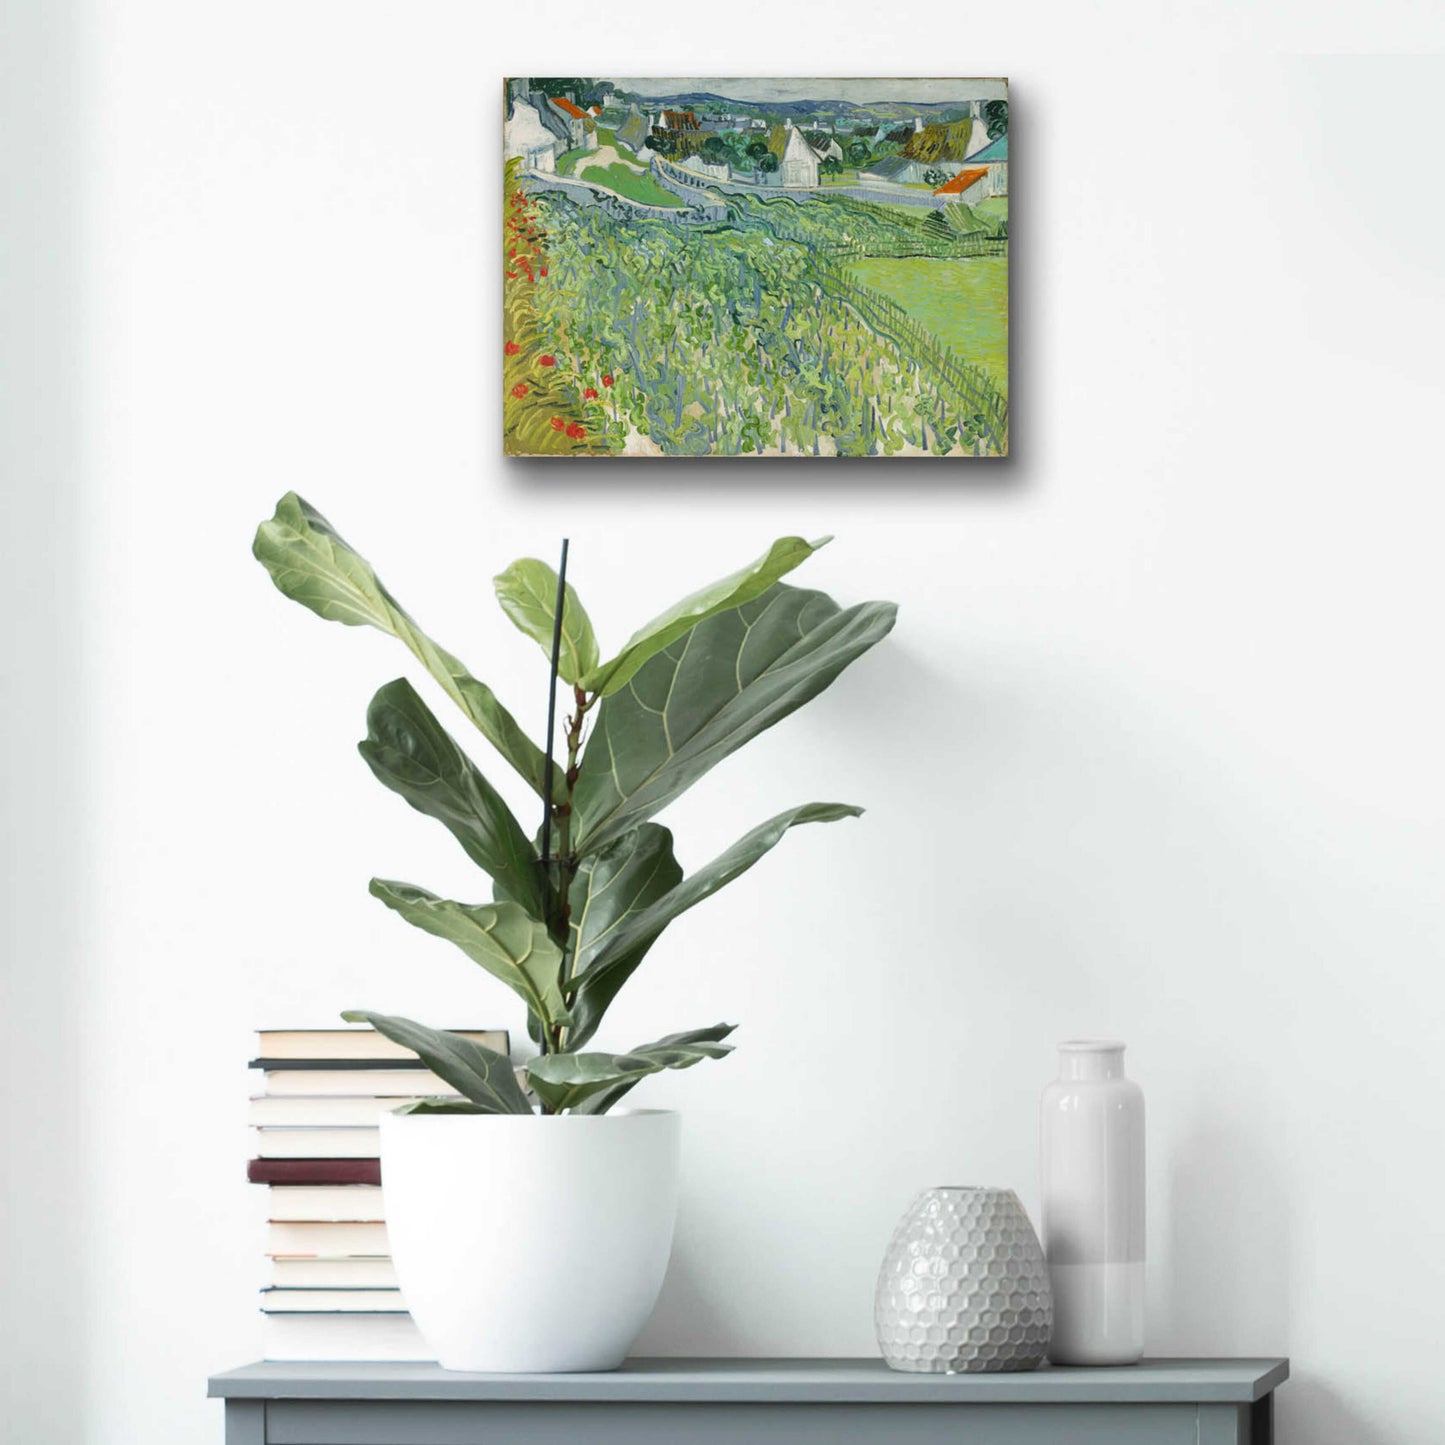 Epic Art 'Vineyards At Auvers' by Vincent Van Gogh, Acrylic Glass Wall Art,16x12